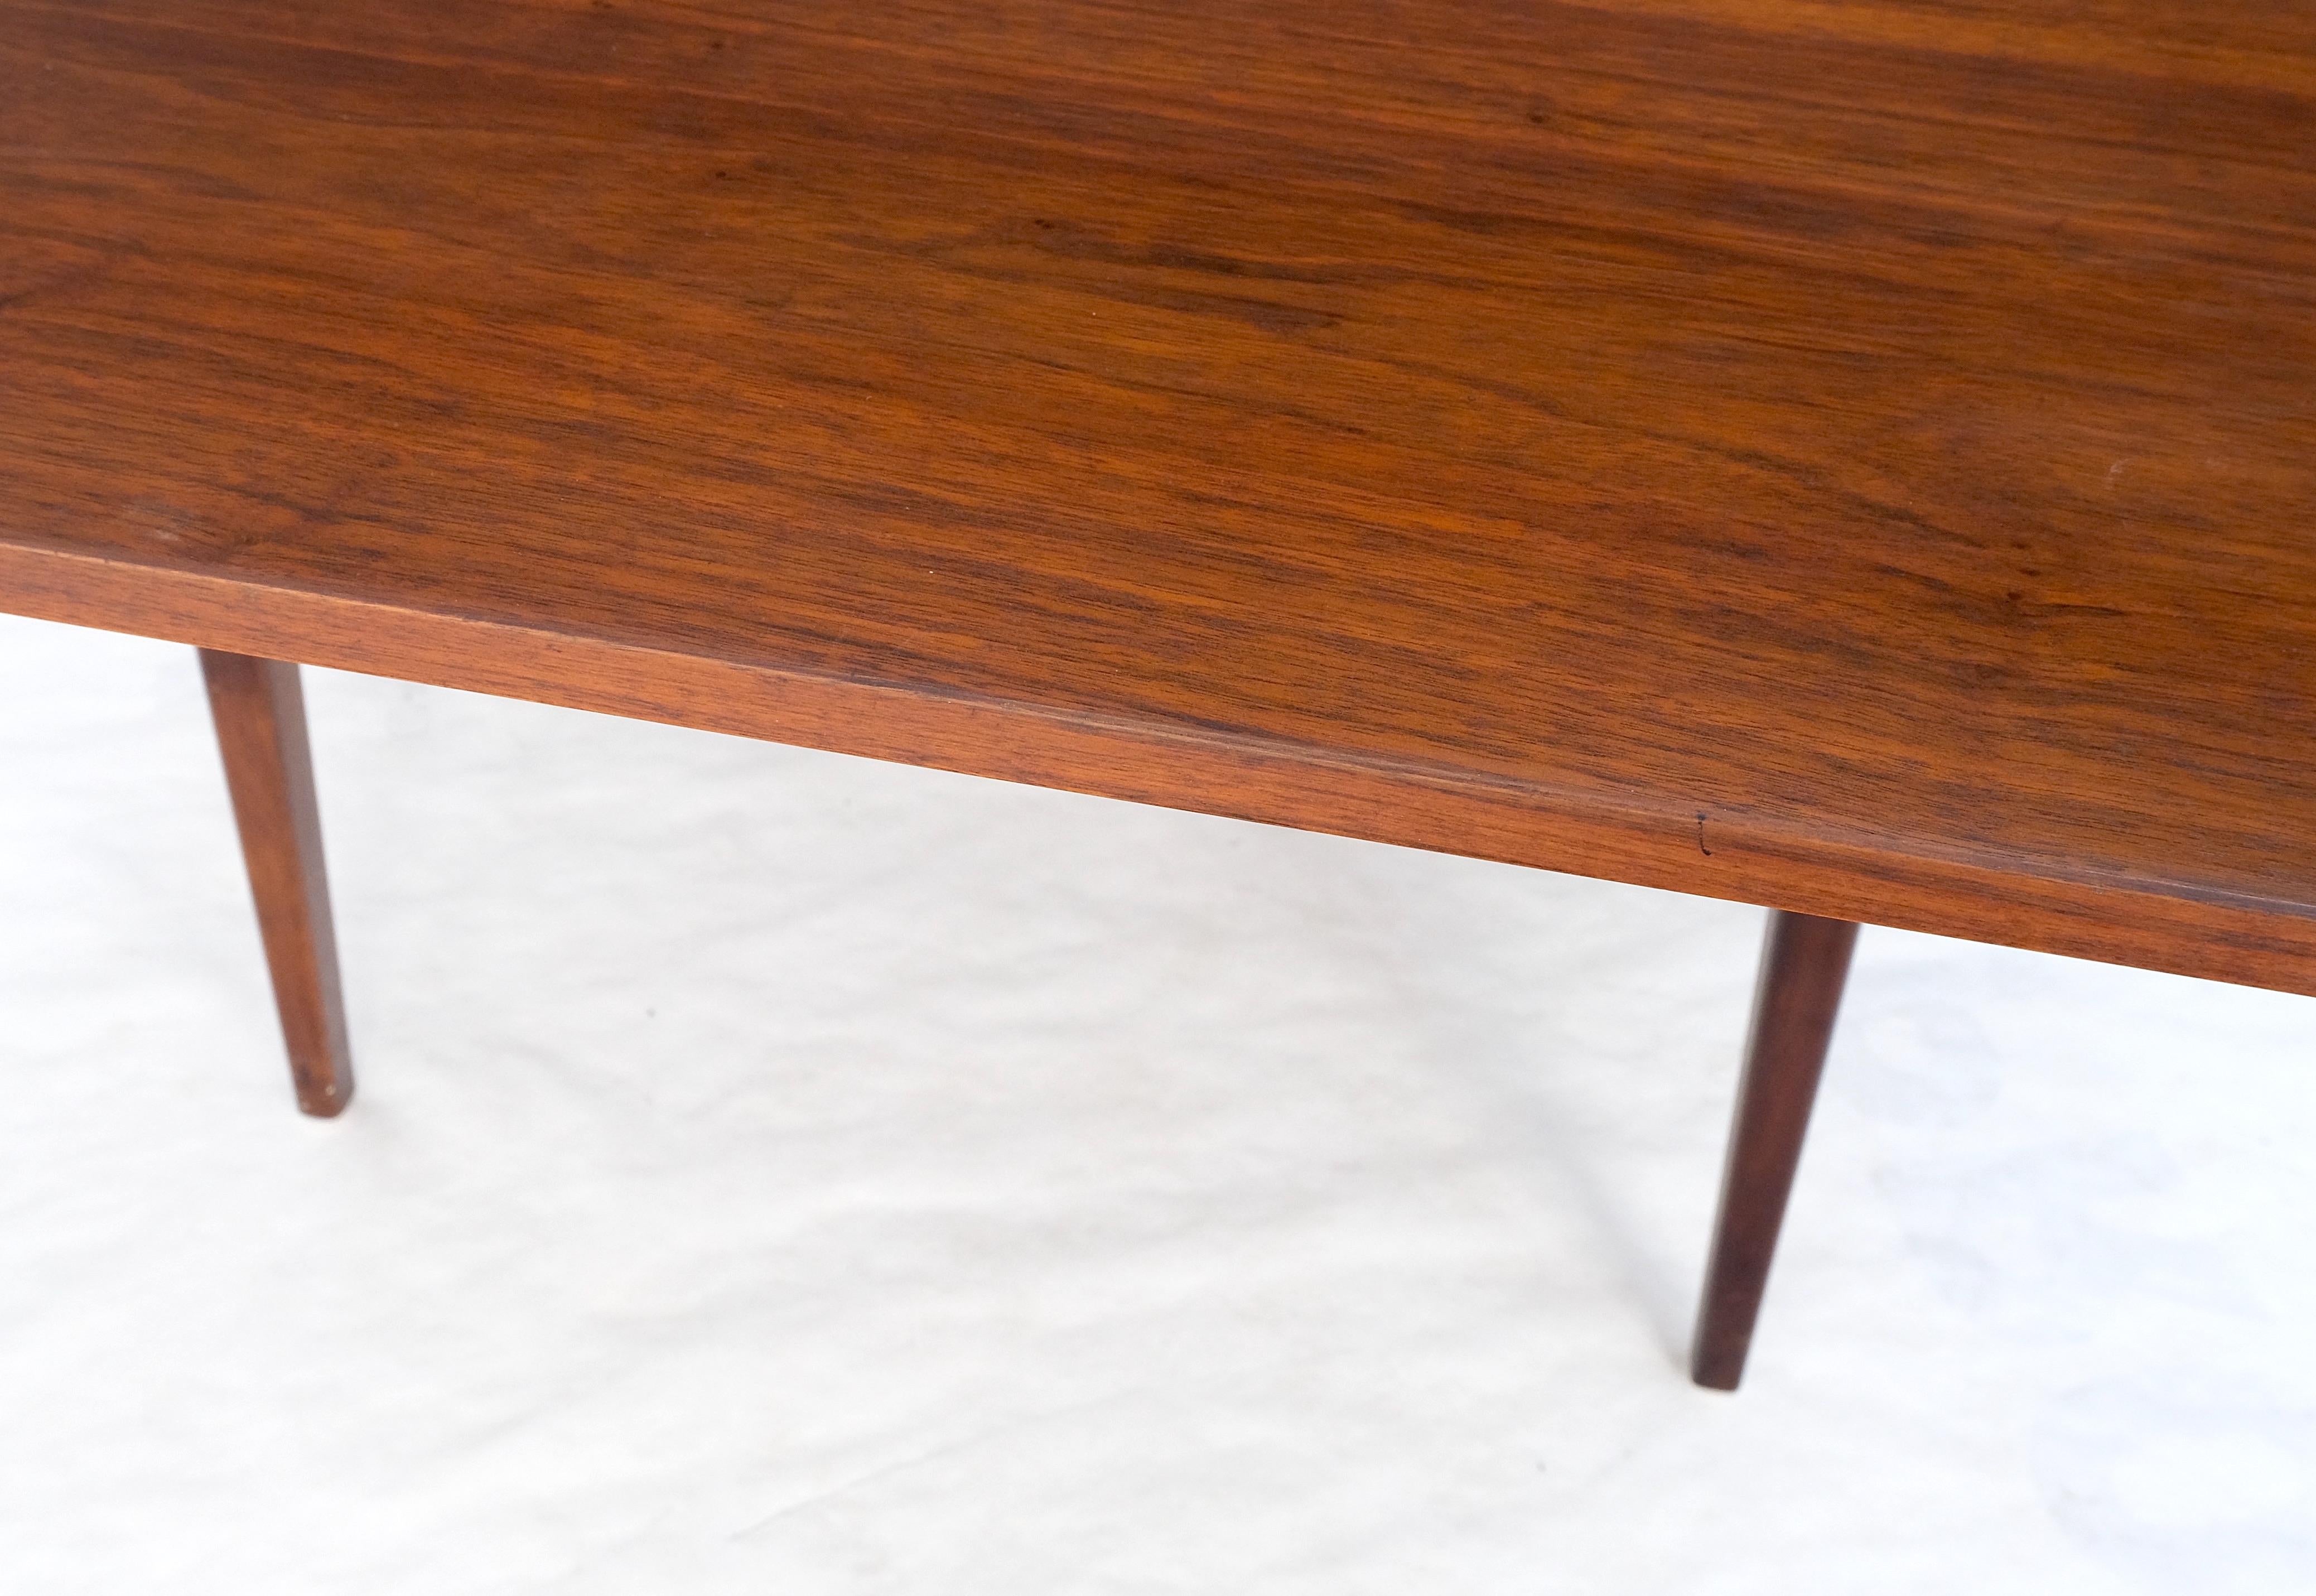 Lacquered Danish Mid-Century Modern Walnut Drop Leaf Dining Table W/ Extension Leaf Mint! For Sale